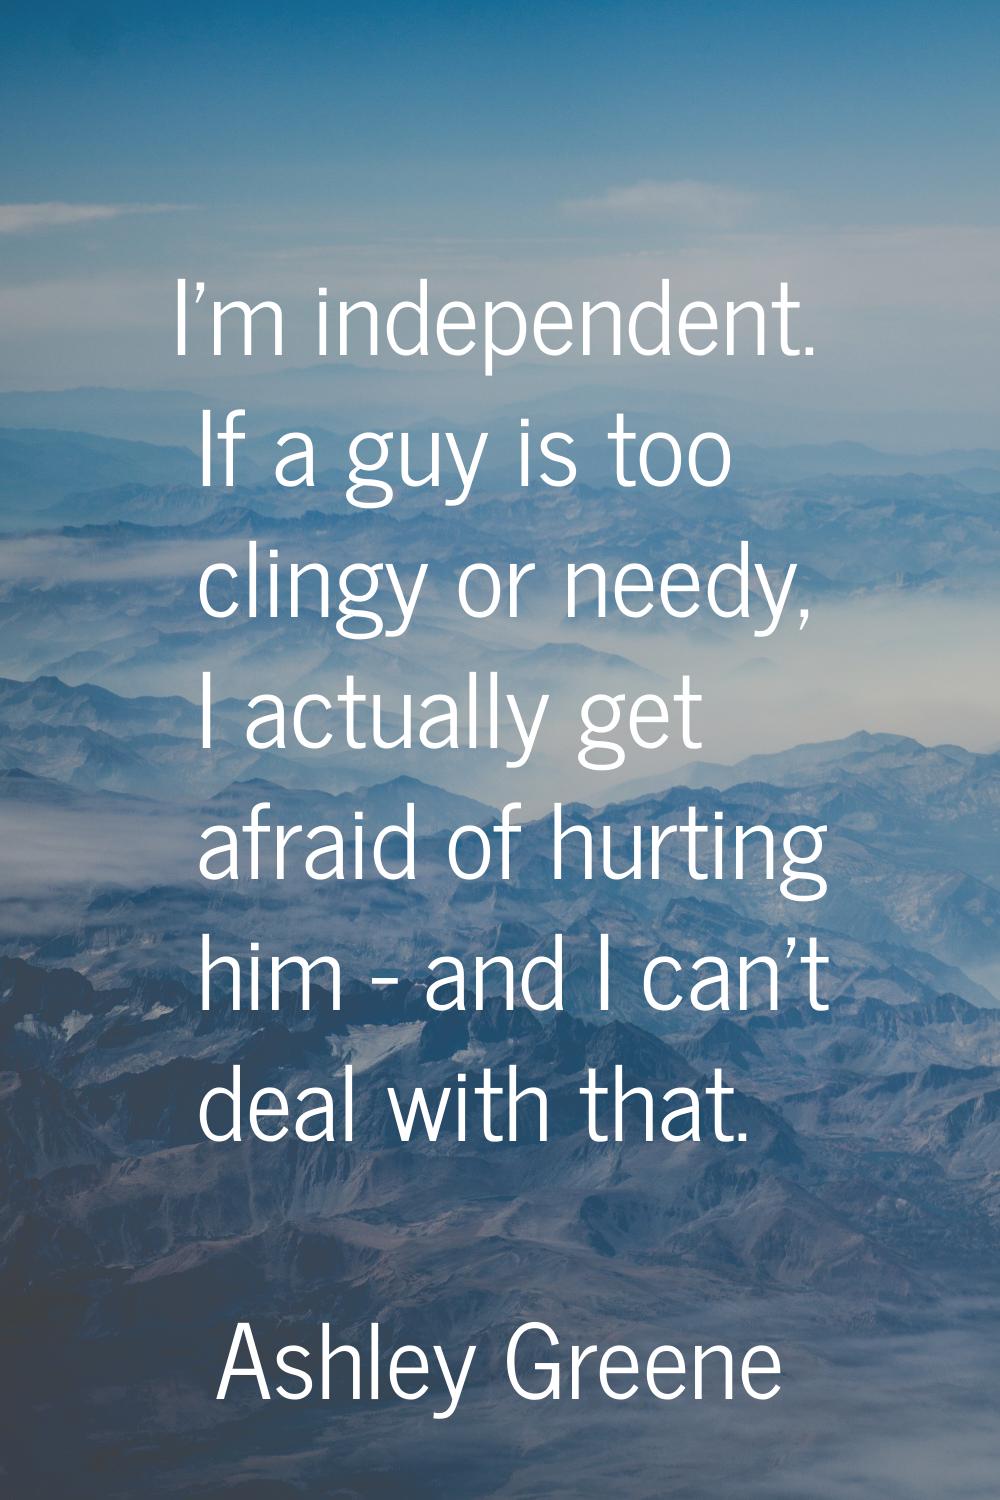 I'm independent. If a guy is too clingy or needy, I actually get afraid of hurting him - and I can'